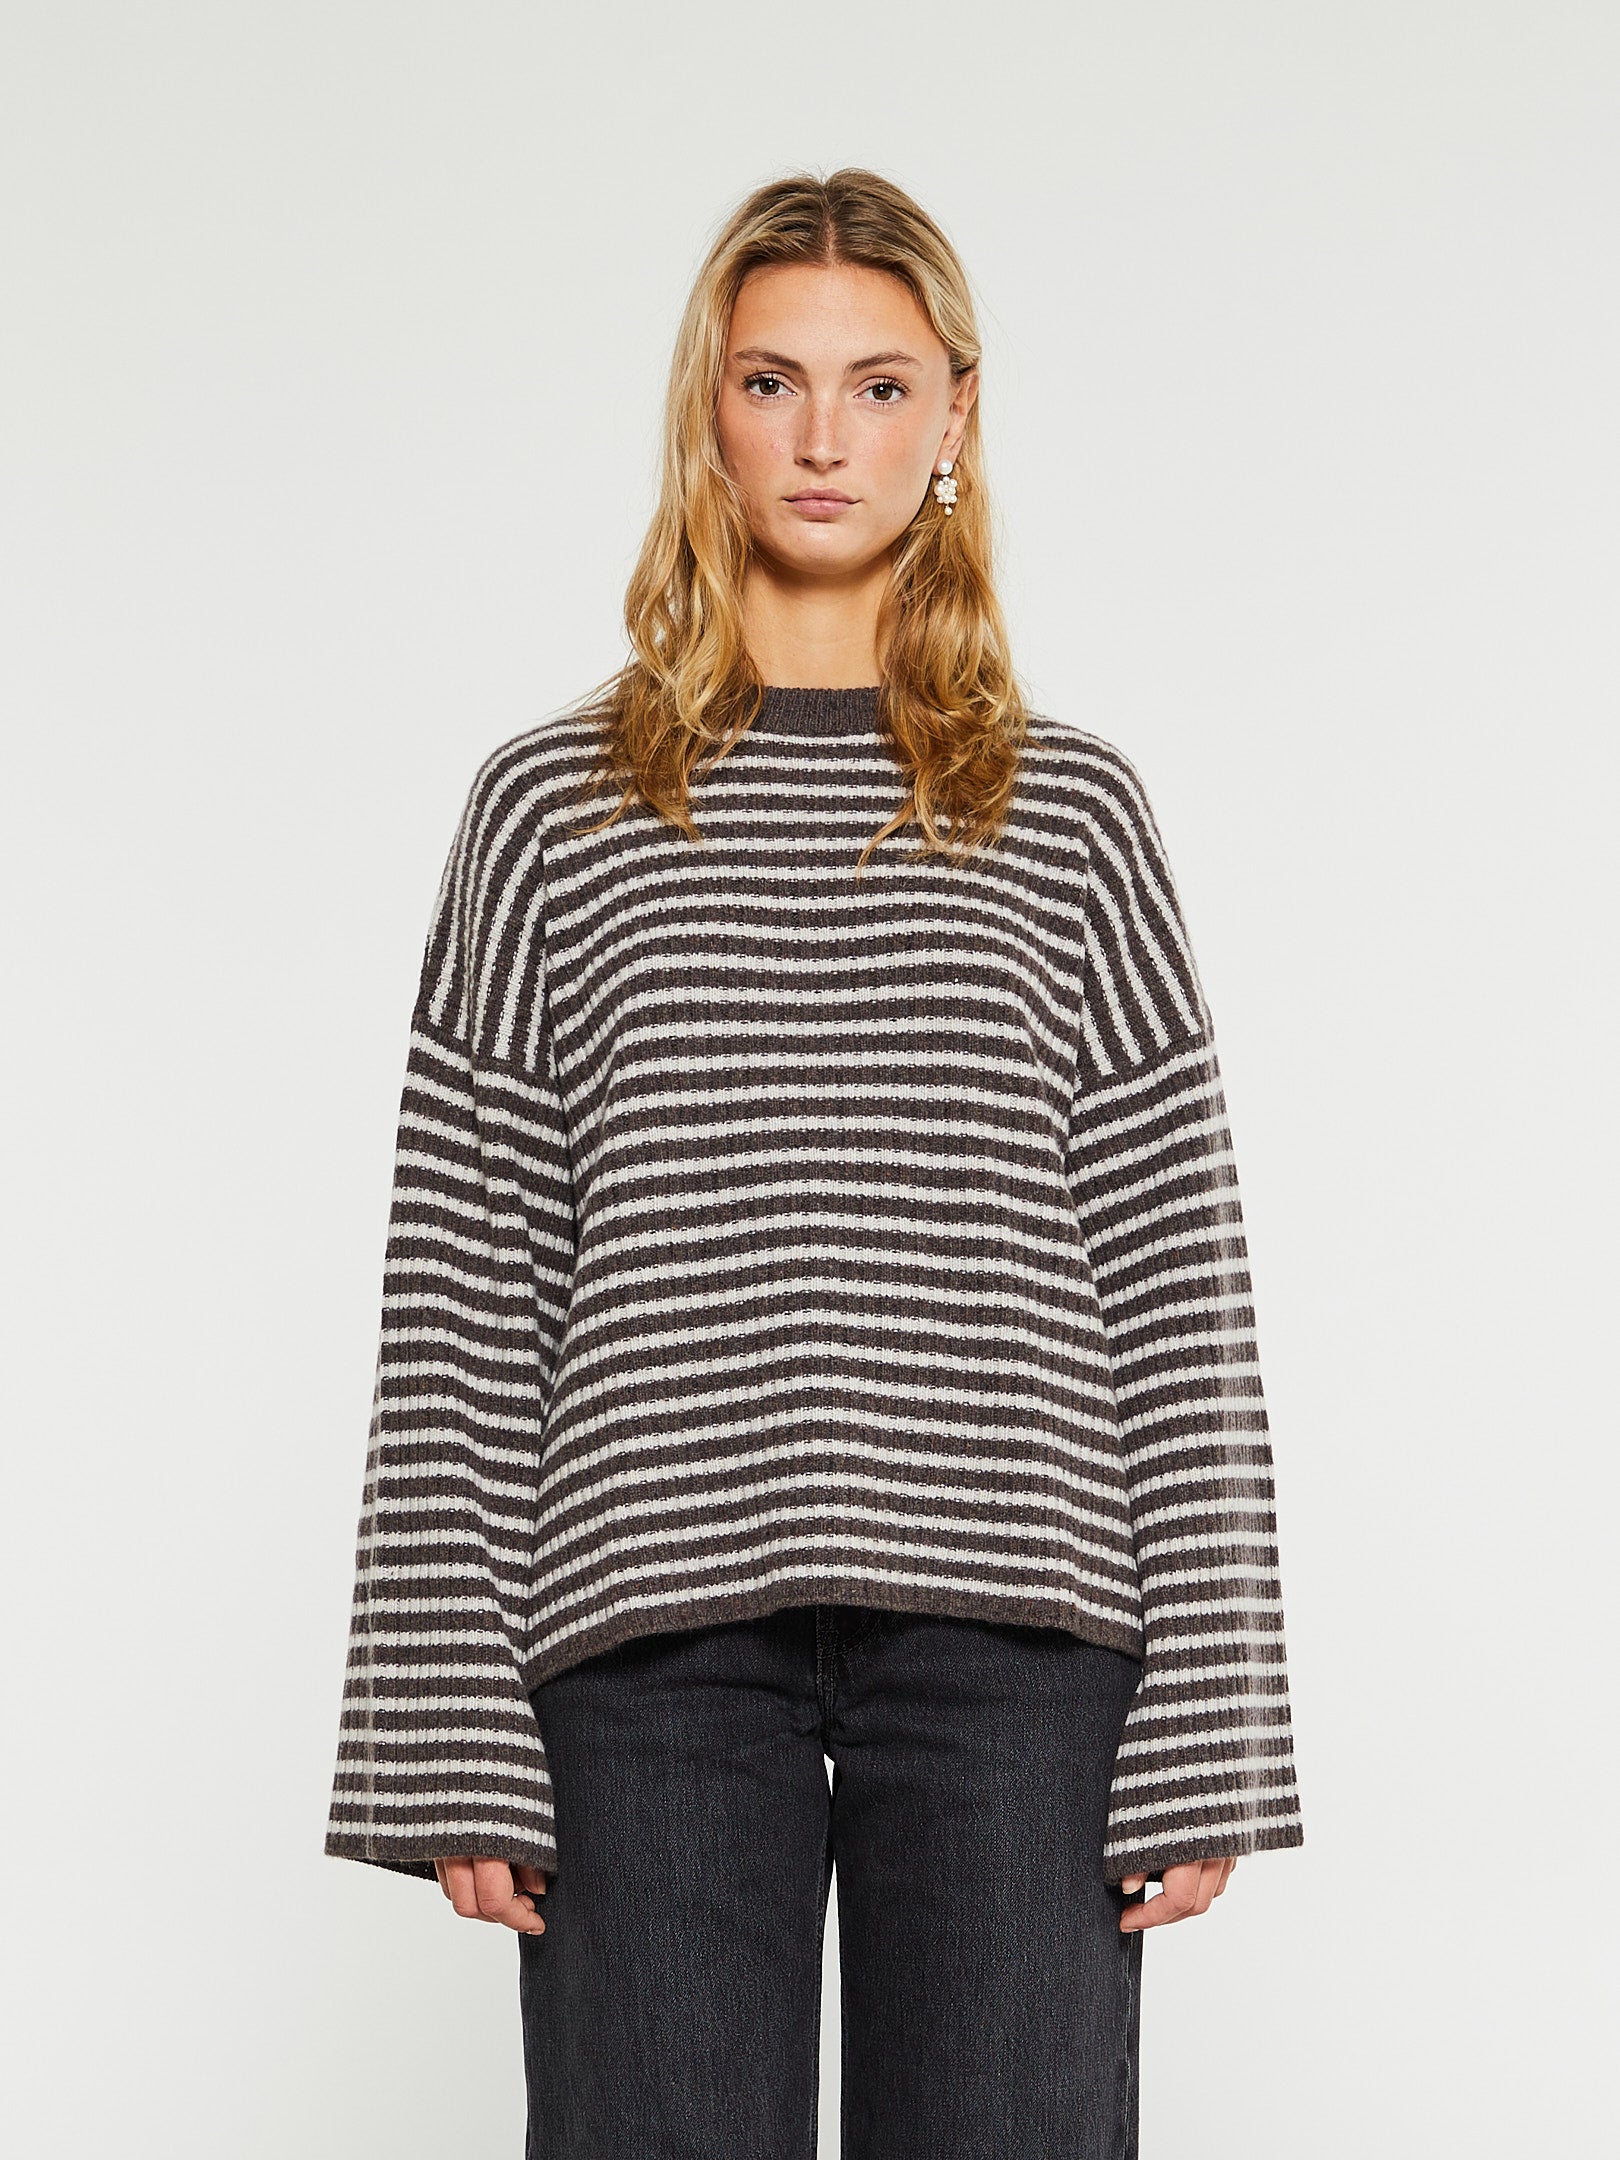 Knitwear | See the wide selection at STOY – Page – stoy